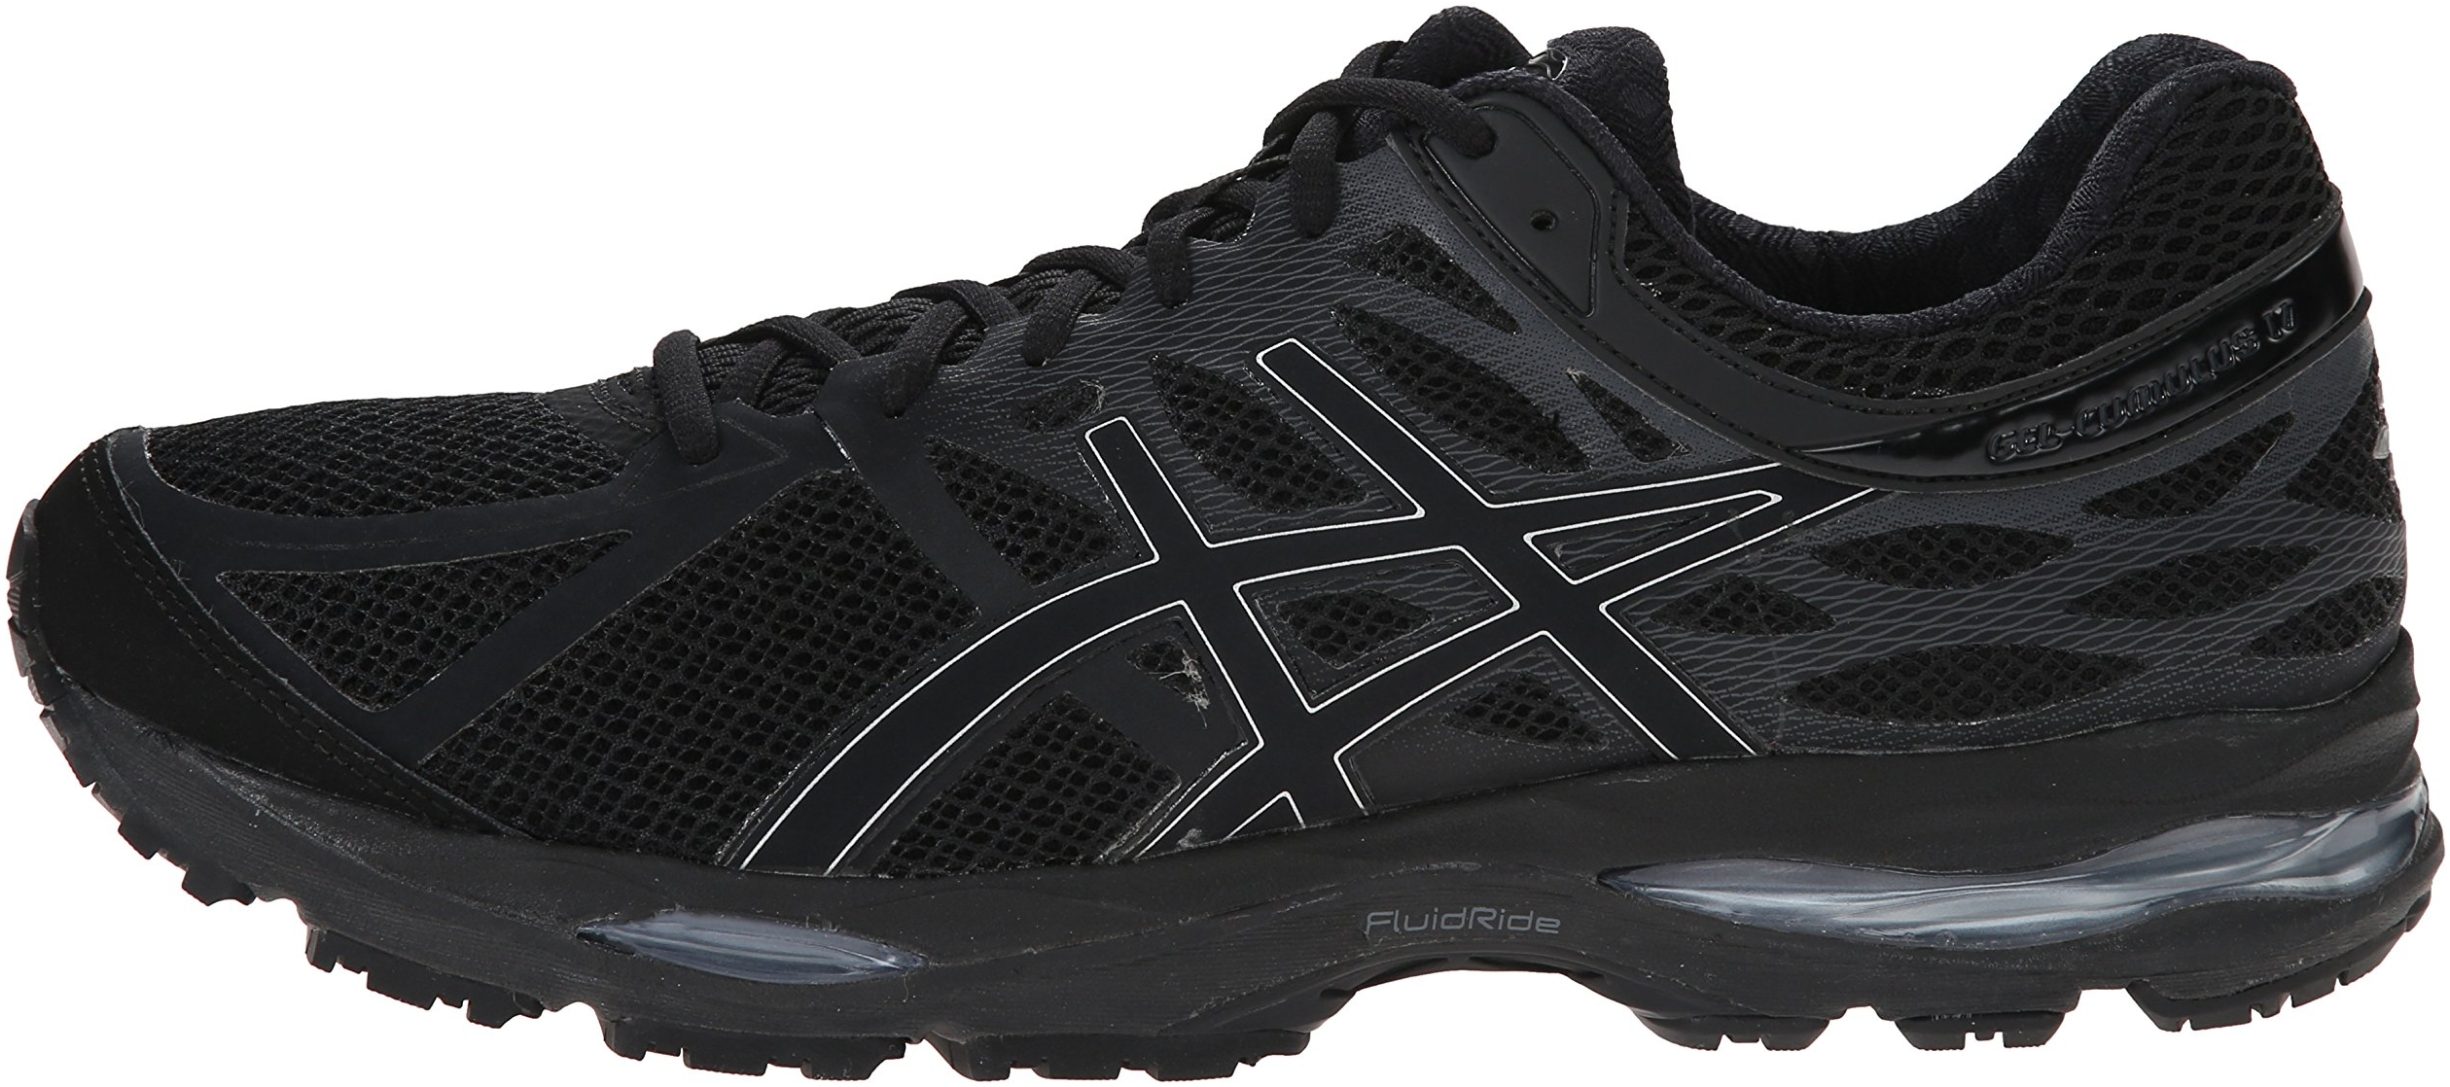 asics cumulus running shoes review